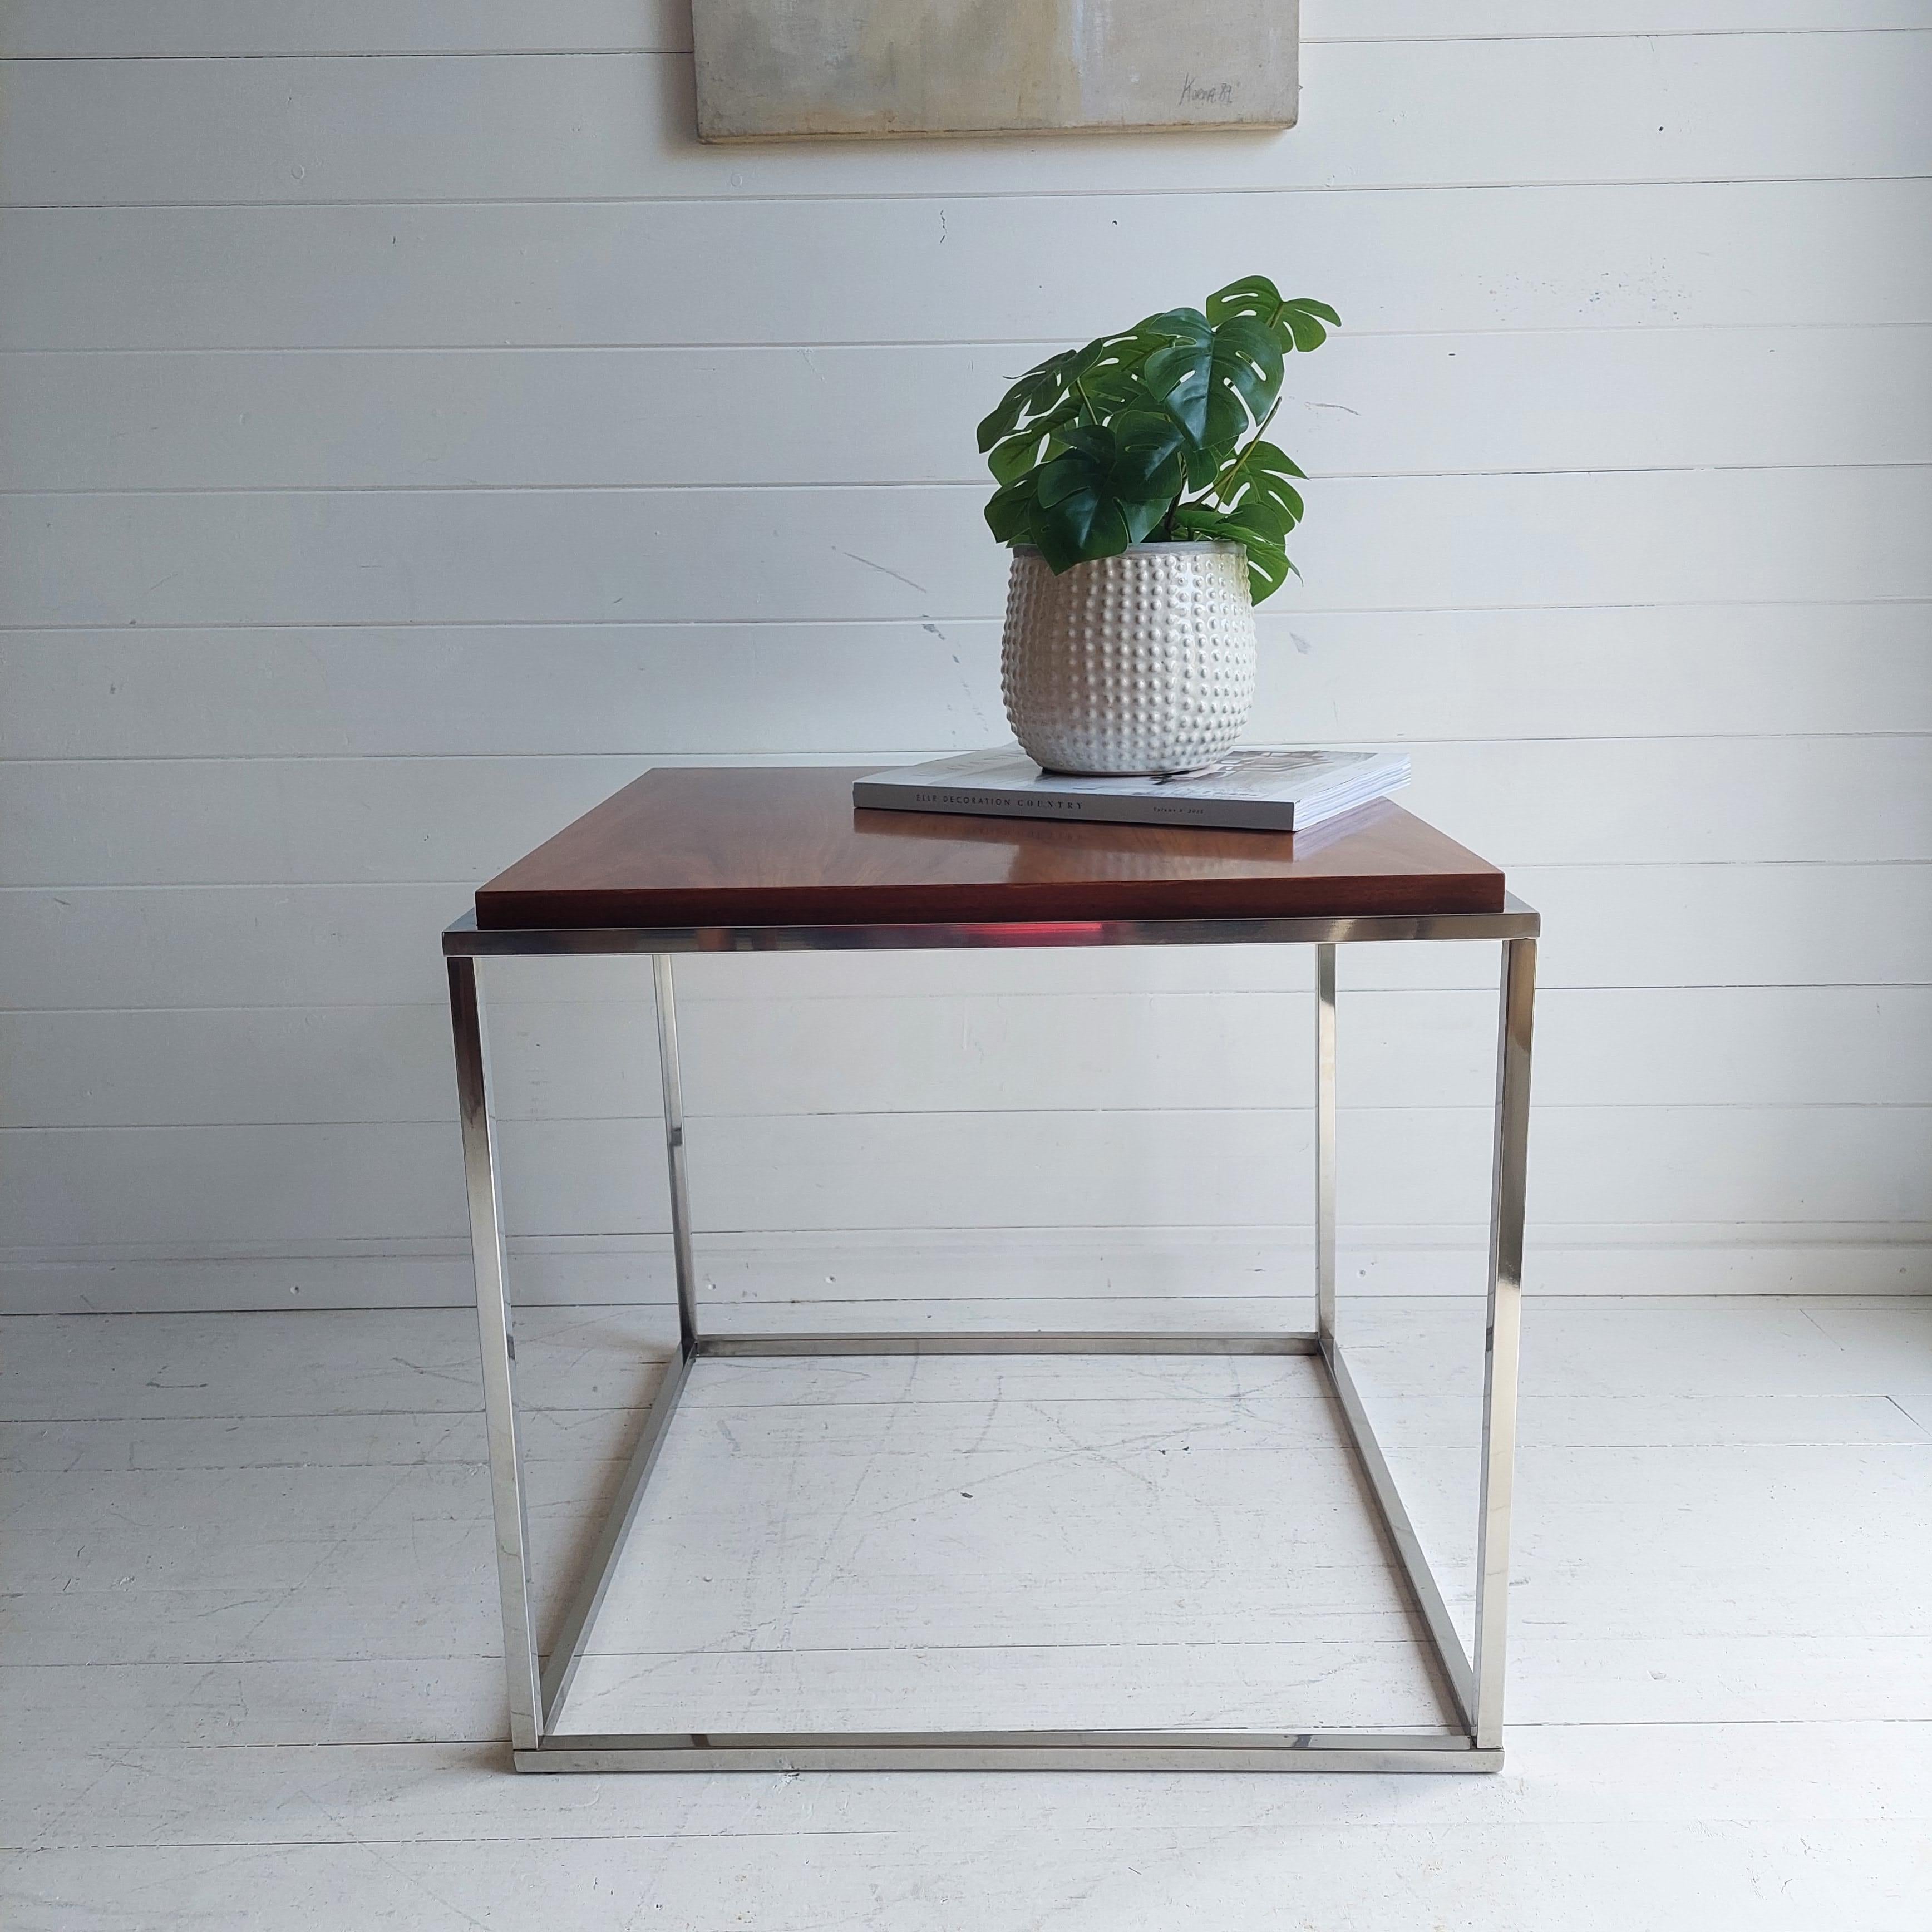 Retro . Mid century . Vintage
Stunning and stylish design

A fabulous teak top and chrome frame cube coffee table ....great for any entertaining room ..and super stylish too .
Designed under Mid-Century Modern Knoll furniture style
A simplistic